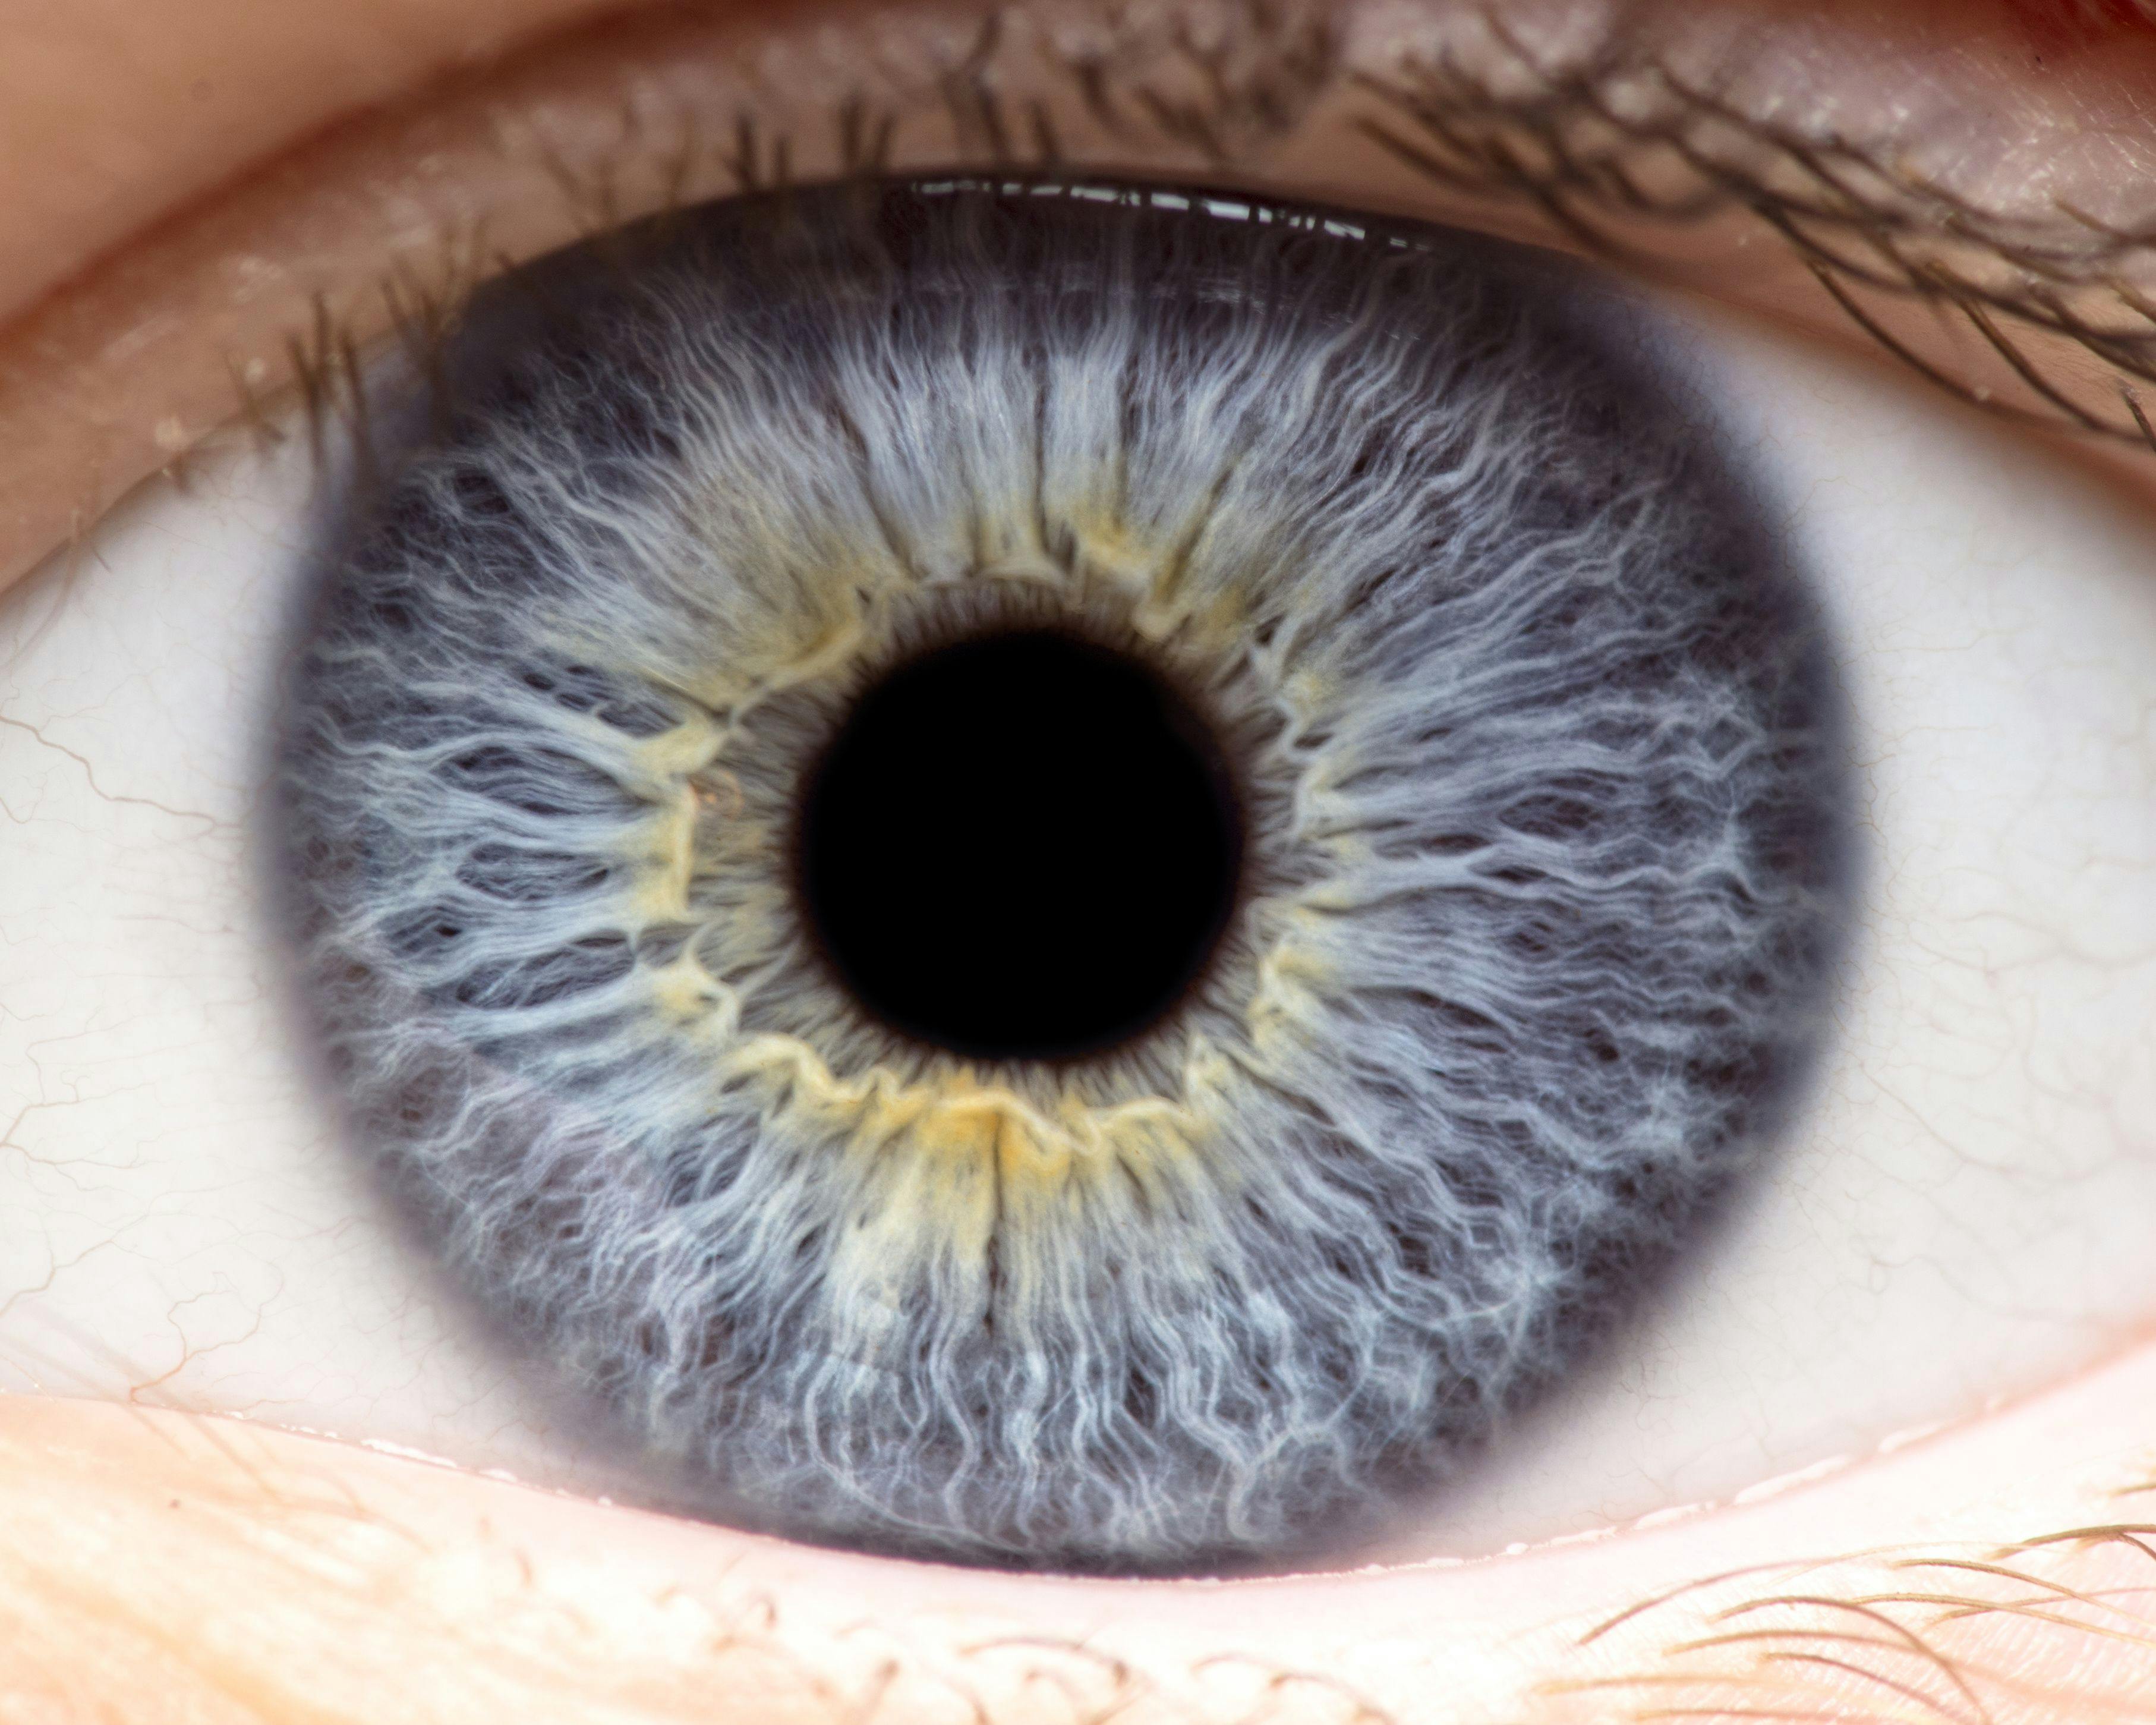 OpRegen Continues to Show Efficacy in Dry AMD Geographic Atrophy